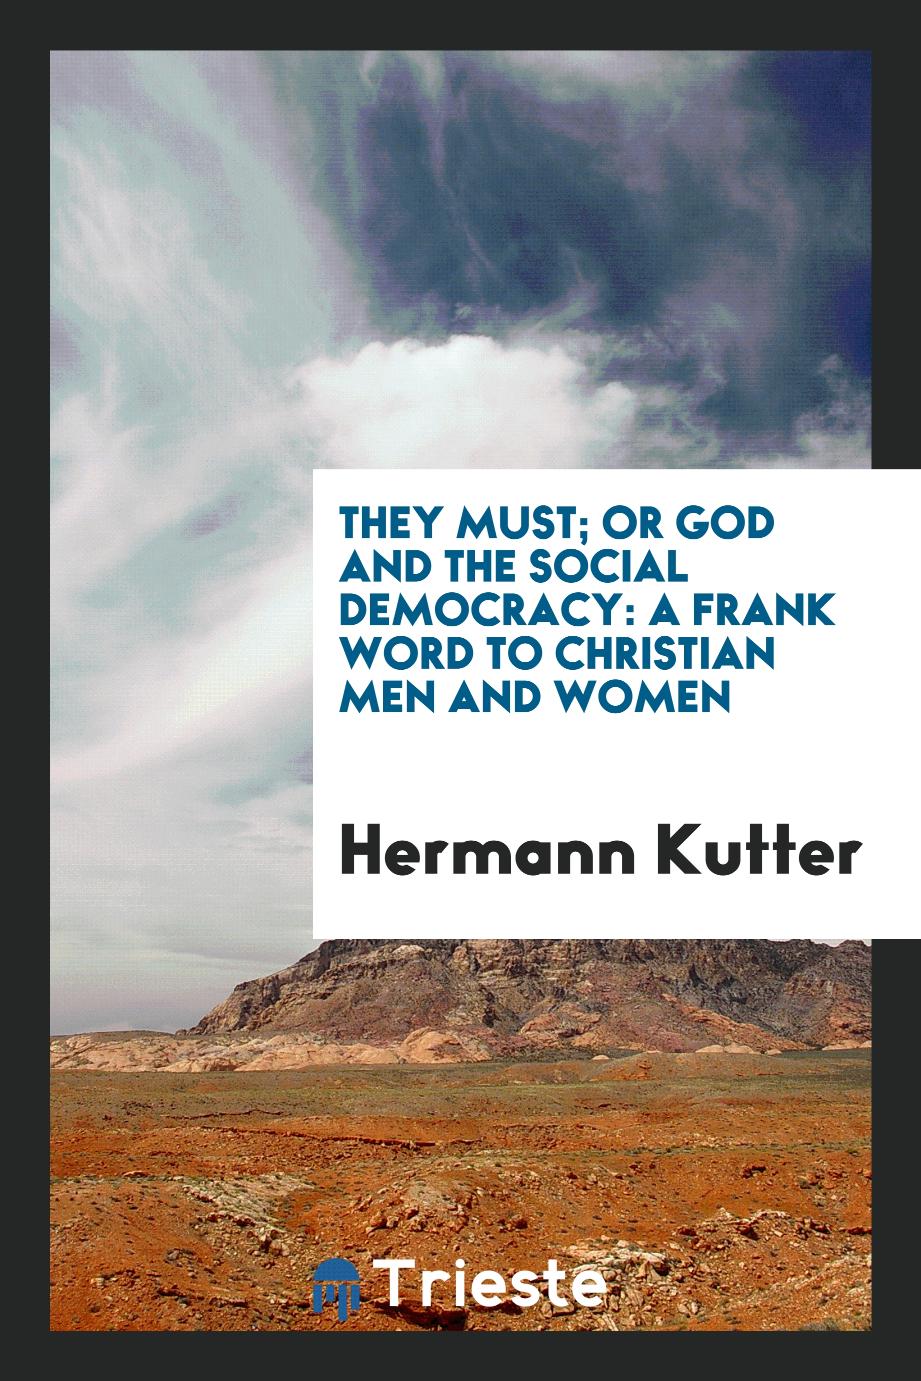 They must; or God and the social democracy: a frank word to christian men and women